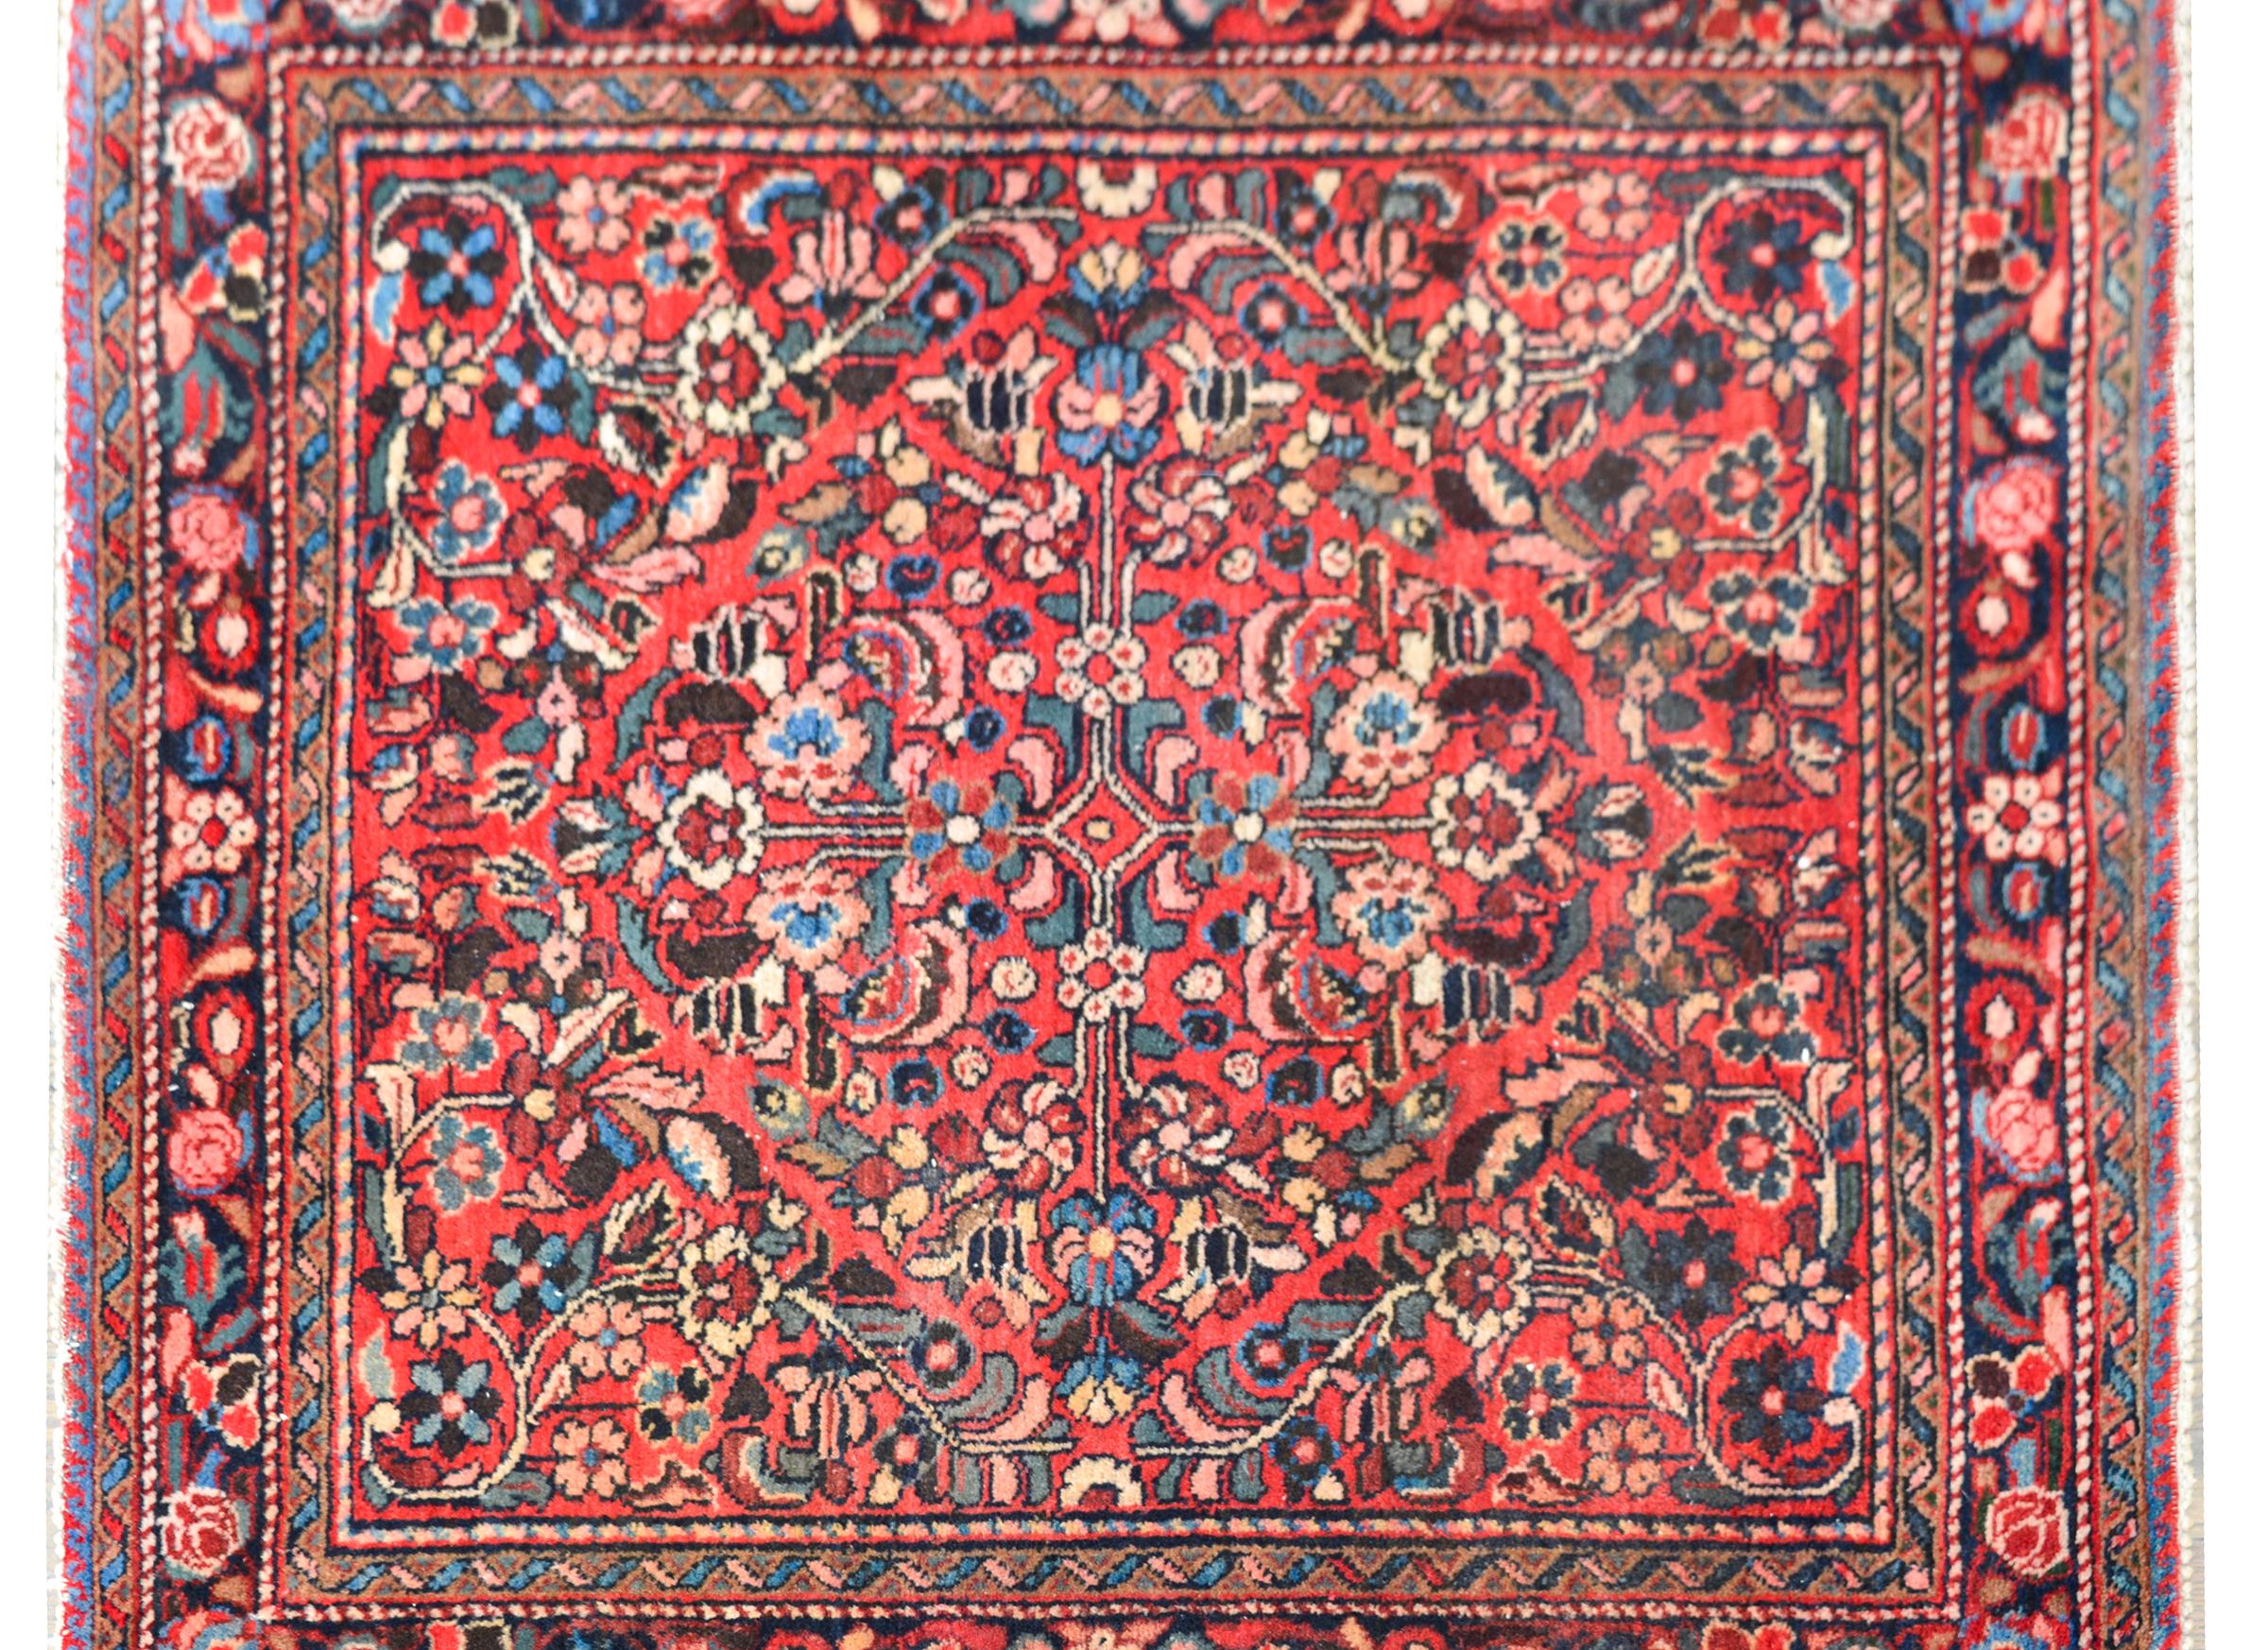 A wonderful early 20th century Persian Lilihan rug of unusual size with a mirrored floral pattern woven in myriad colors including pink, green, light indigo, crimson, and white, and all set against a coral colors background. The border is complex